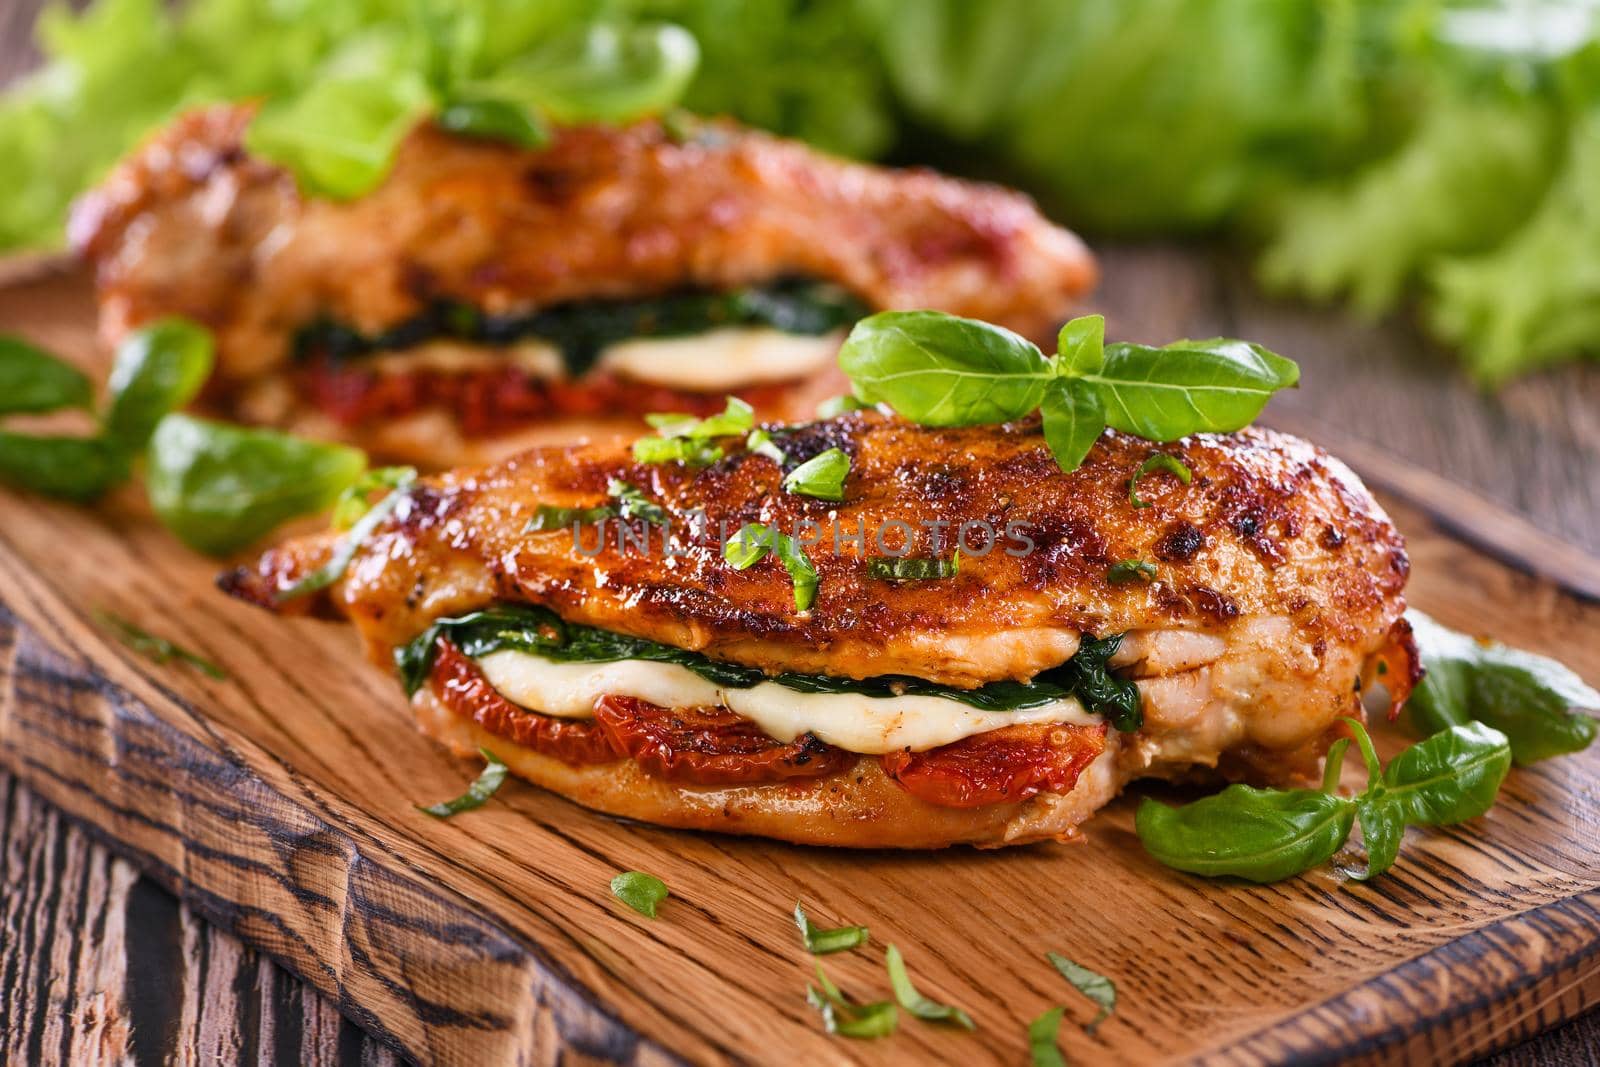 Baked chicken breast with mozzarella, sun-dried tomatoes, spinach. The meat is served on a wooden board with basil and lettuce.